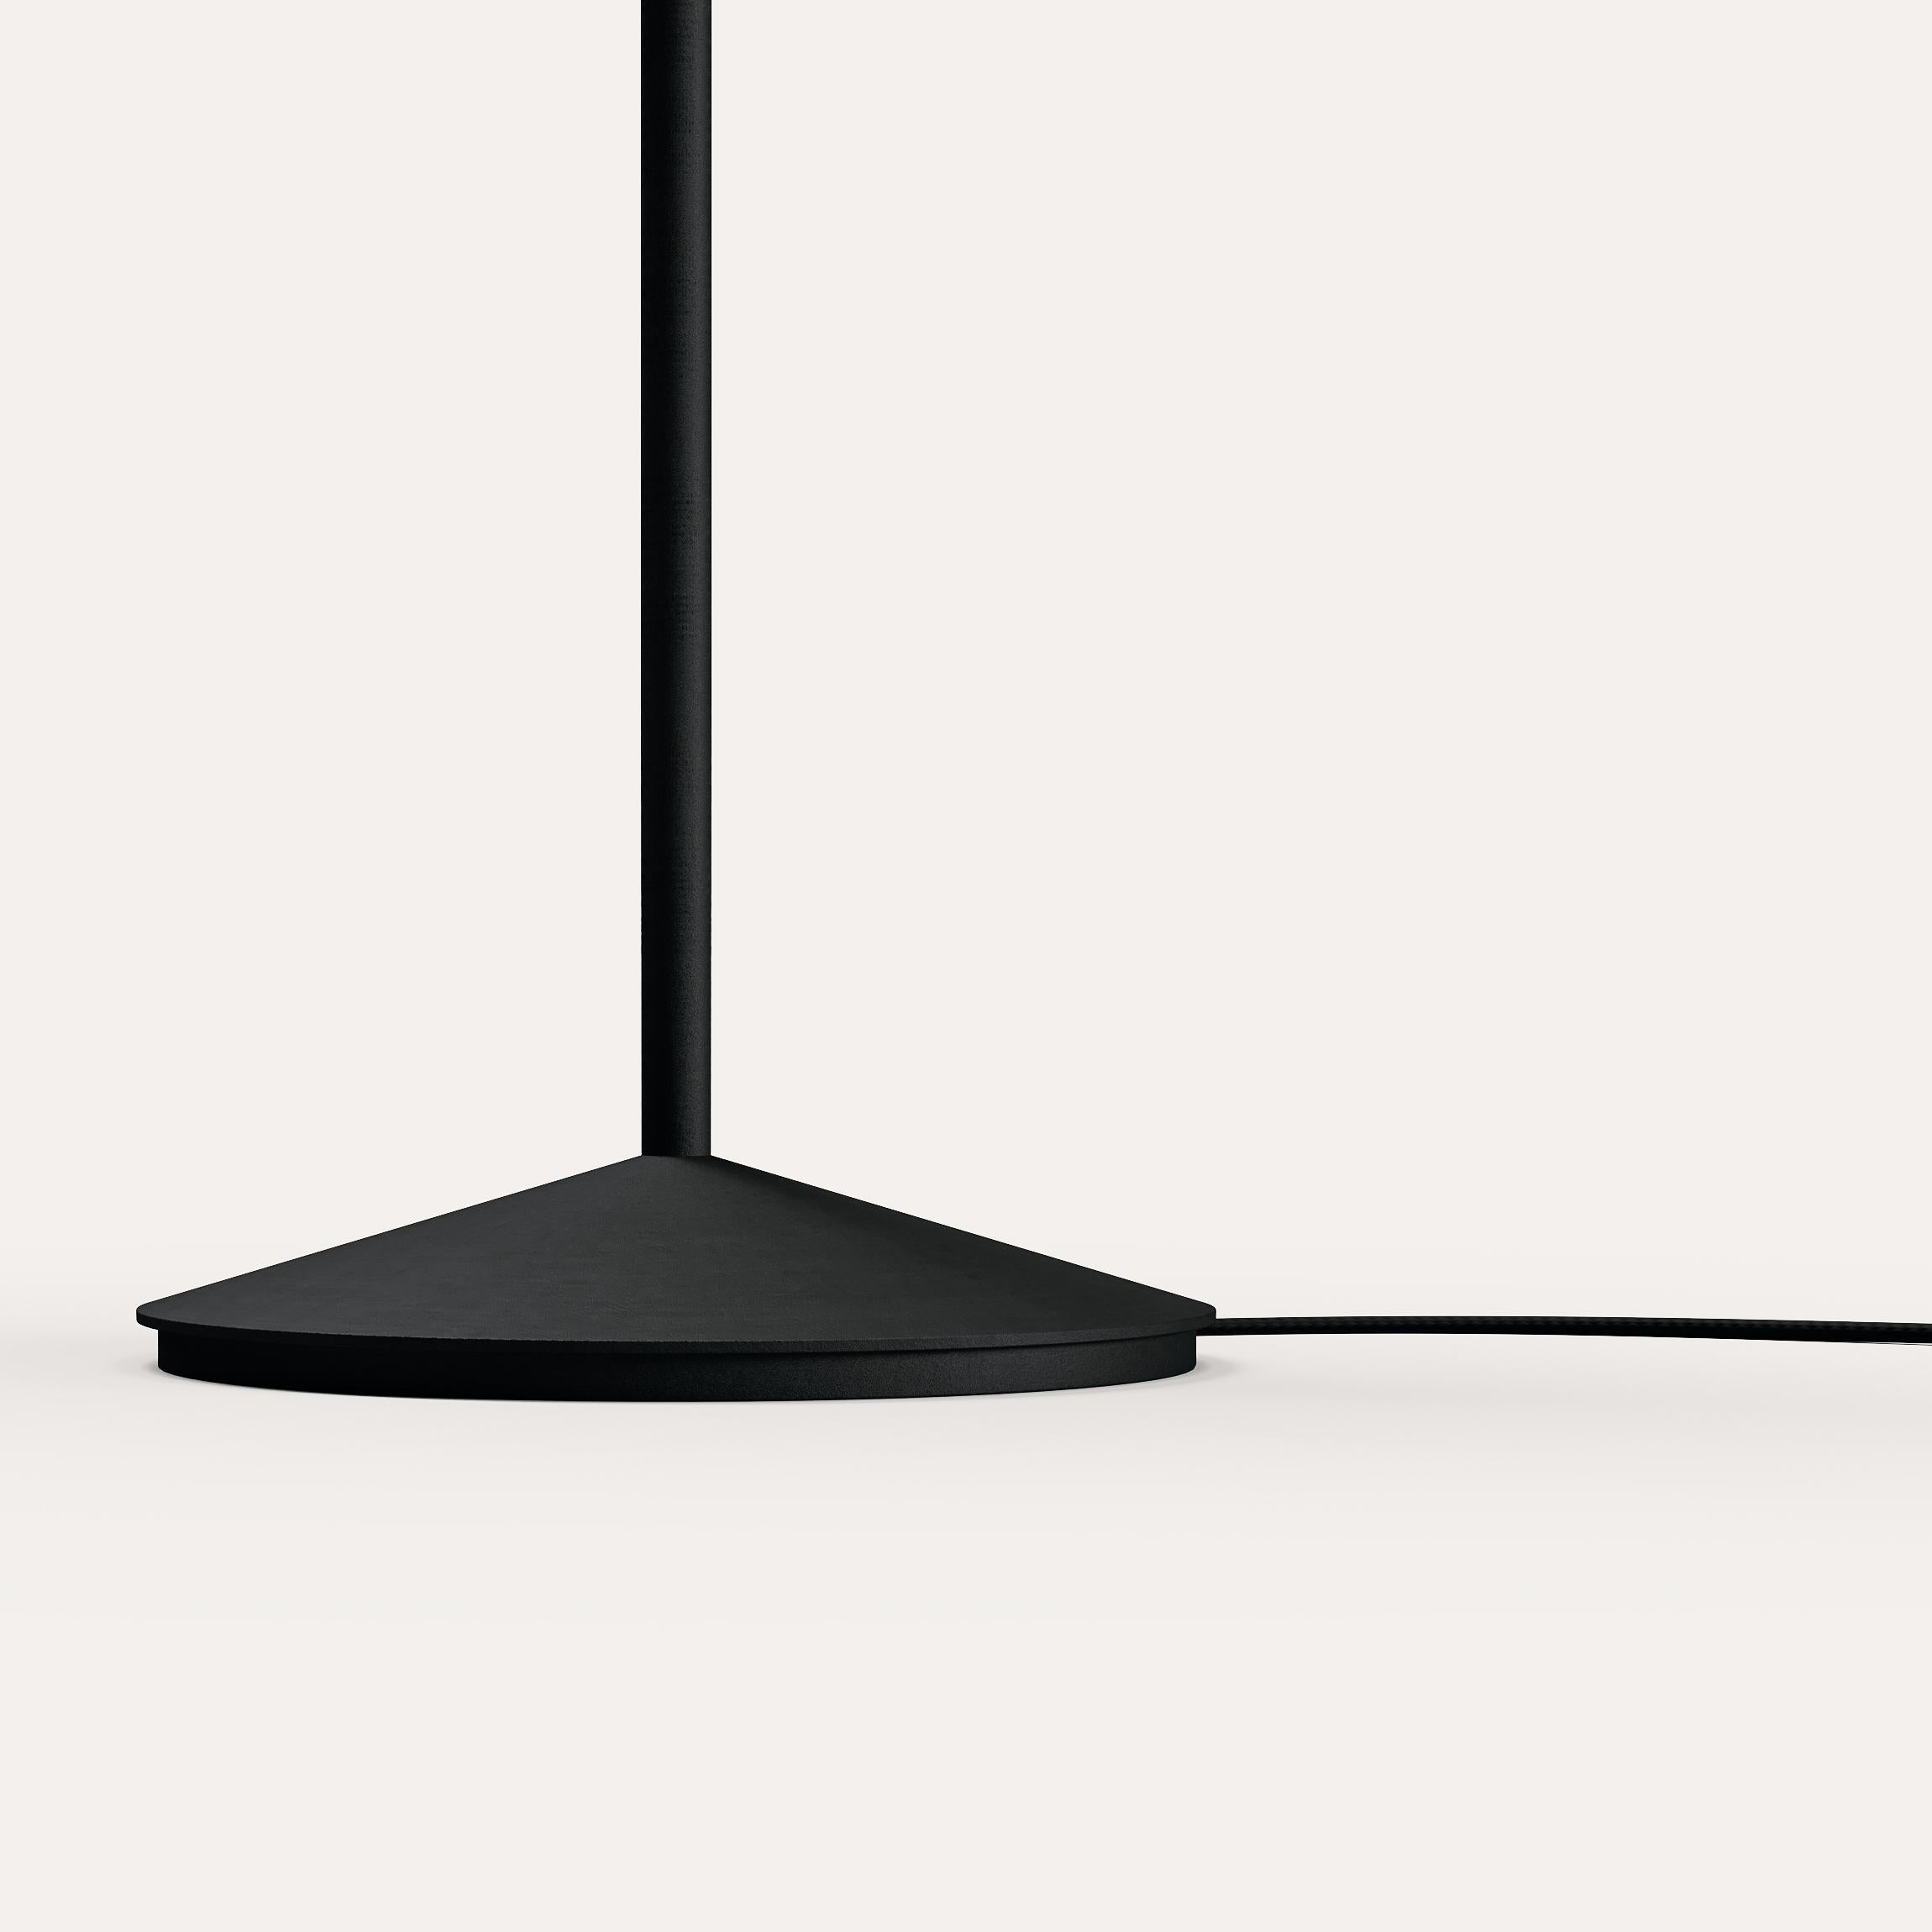 Powder-Coated Circus Floor Lamp Designed by Corinna Warm for Warm Black/Bronze For Sale